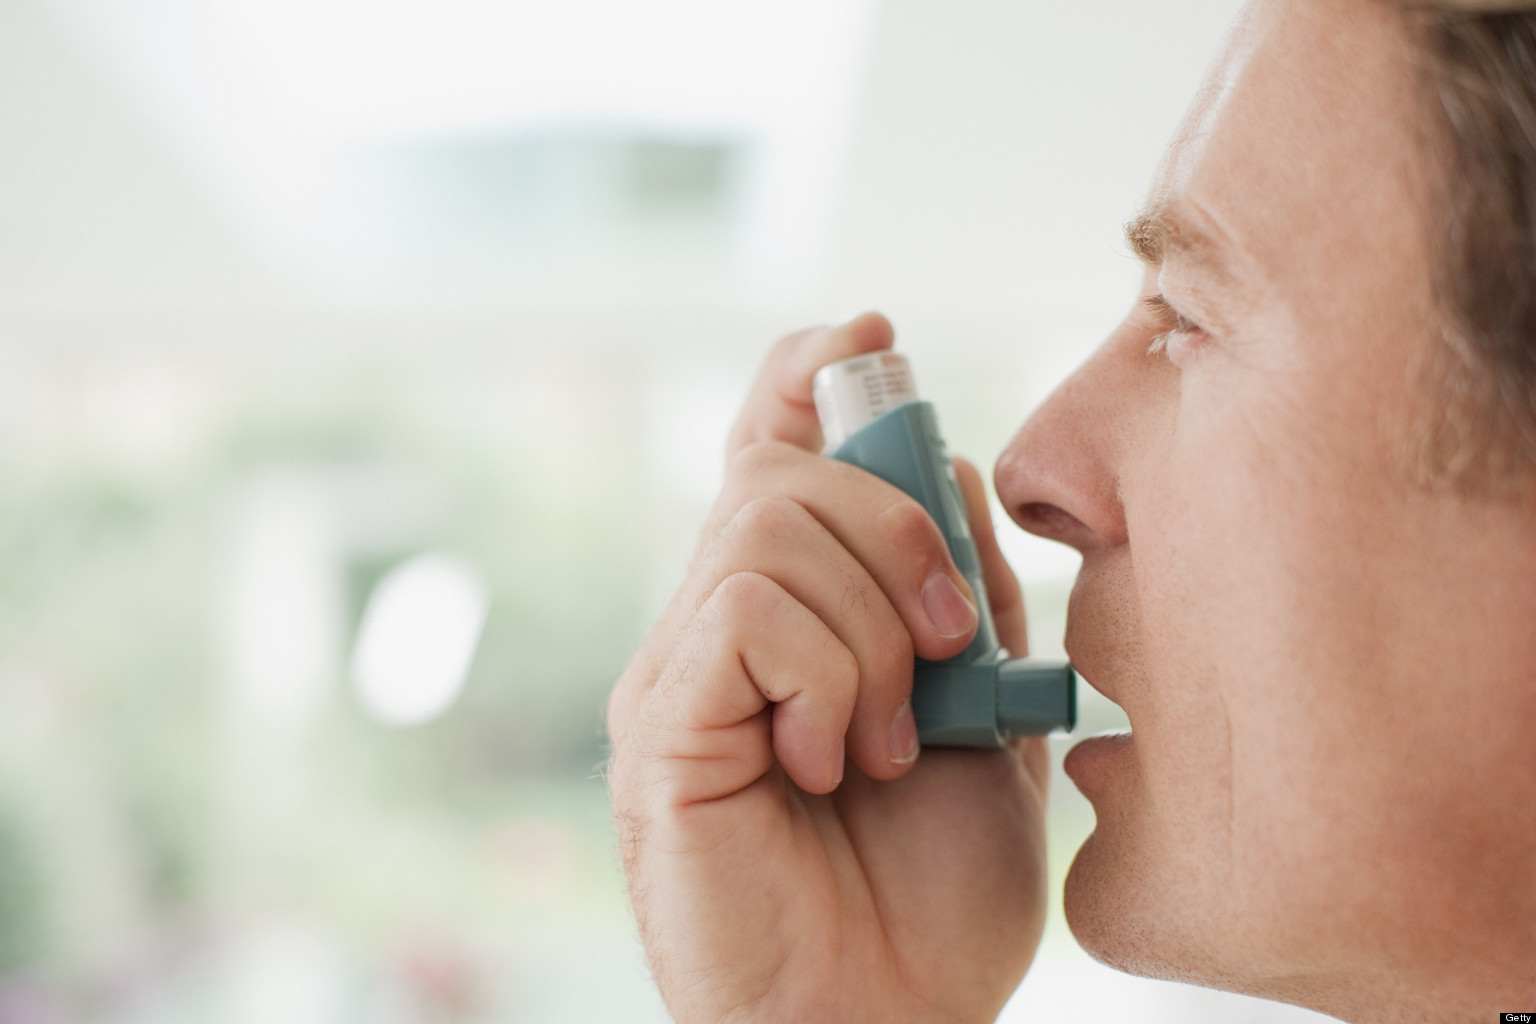 Asthmatic patients should generally avoid medications that block the beta-2 receptors in the lungs (source) 